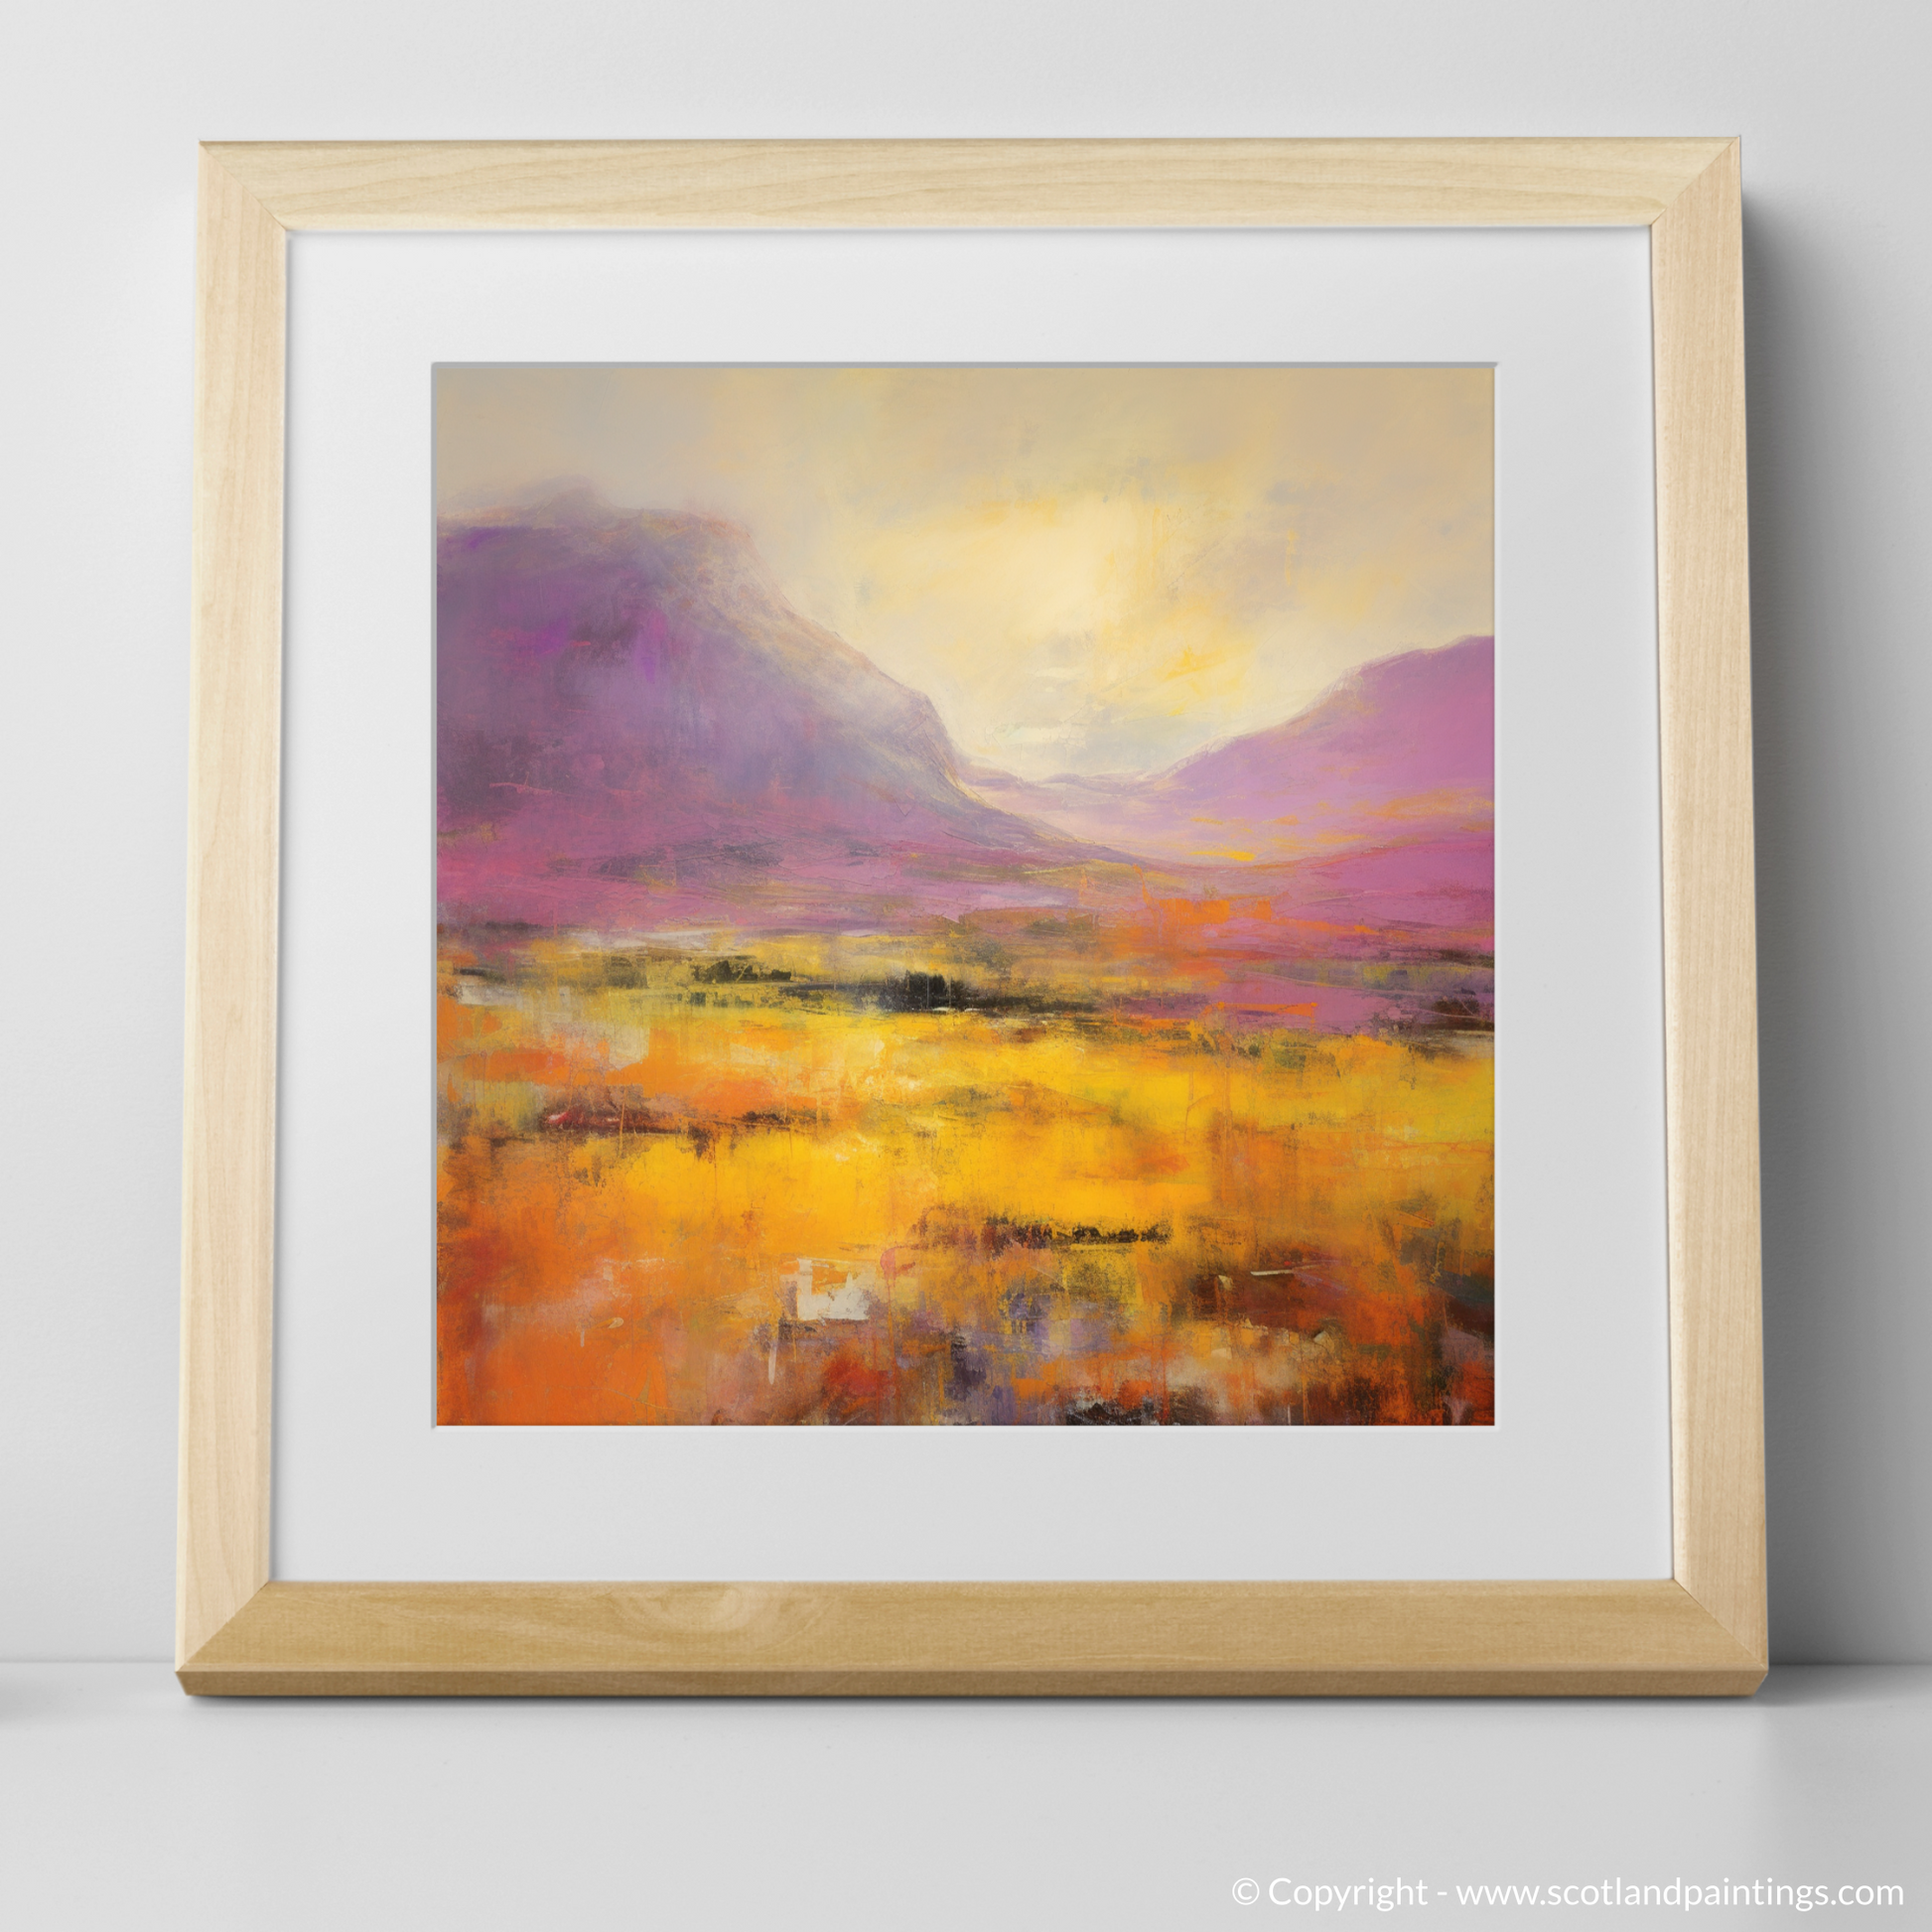 Art Print of Golden light on heather in Glencoe with a natural frame